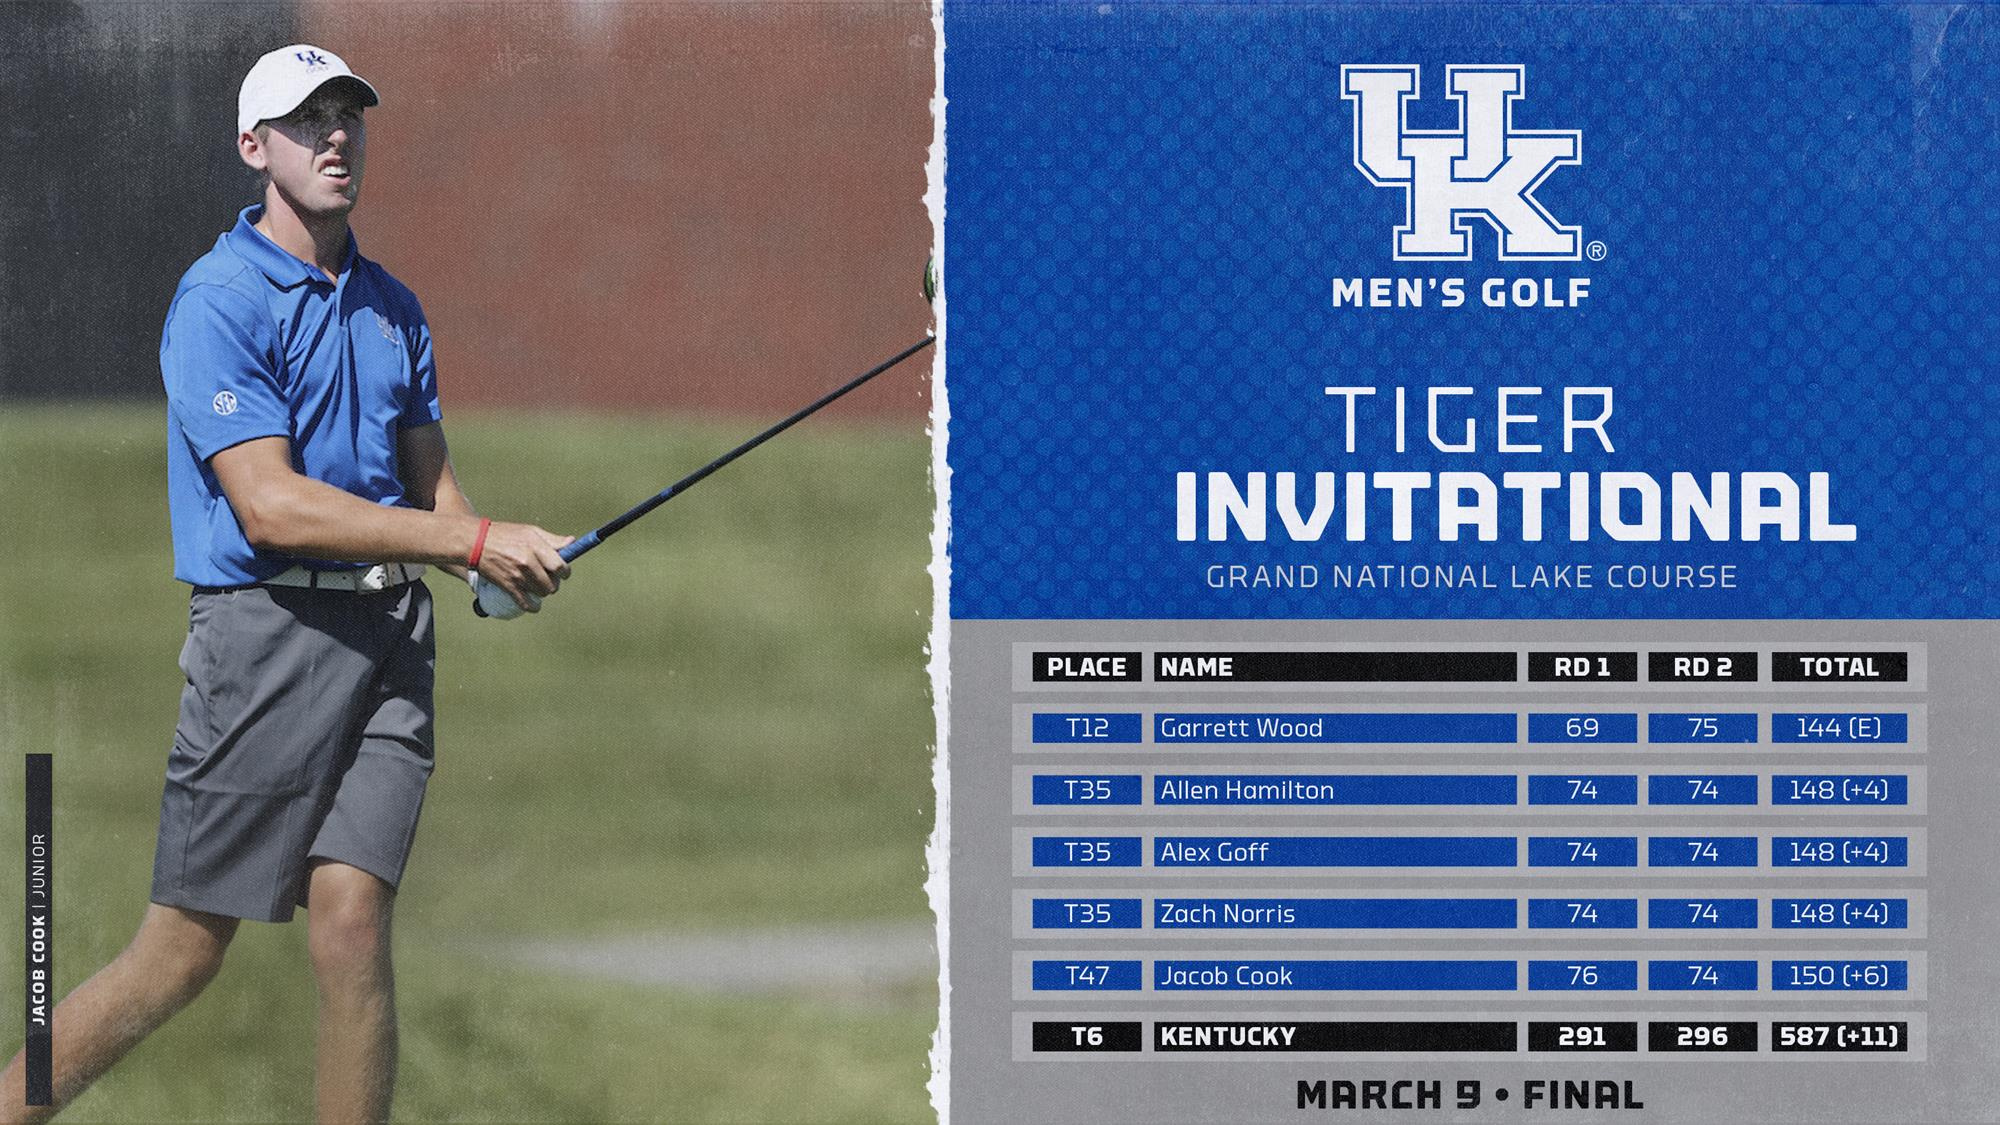 Wildcats Steady Amid Windy Conditions at Tiger Invitational